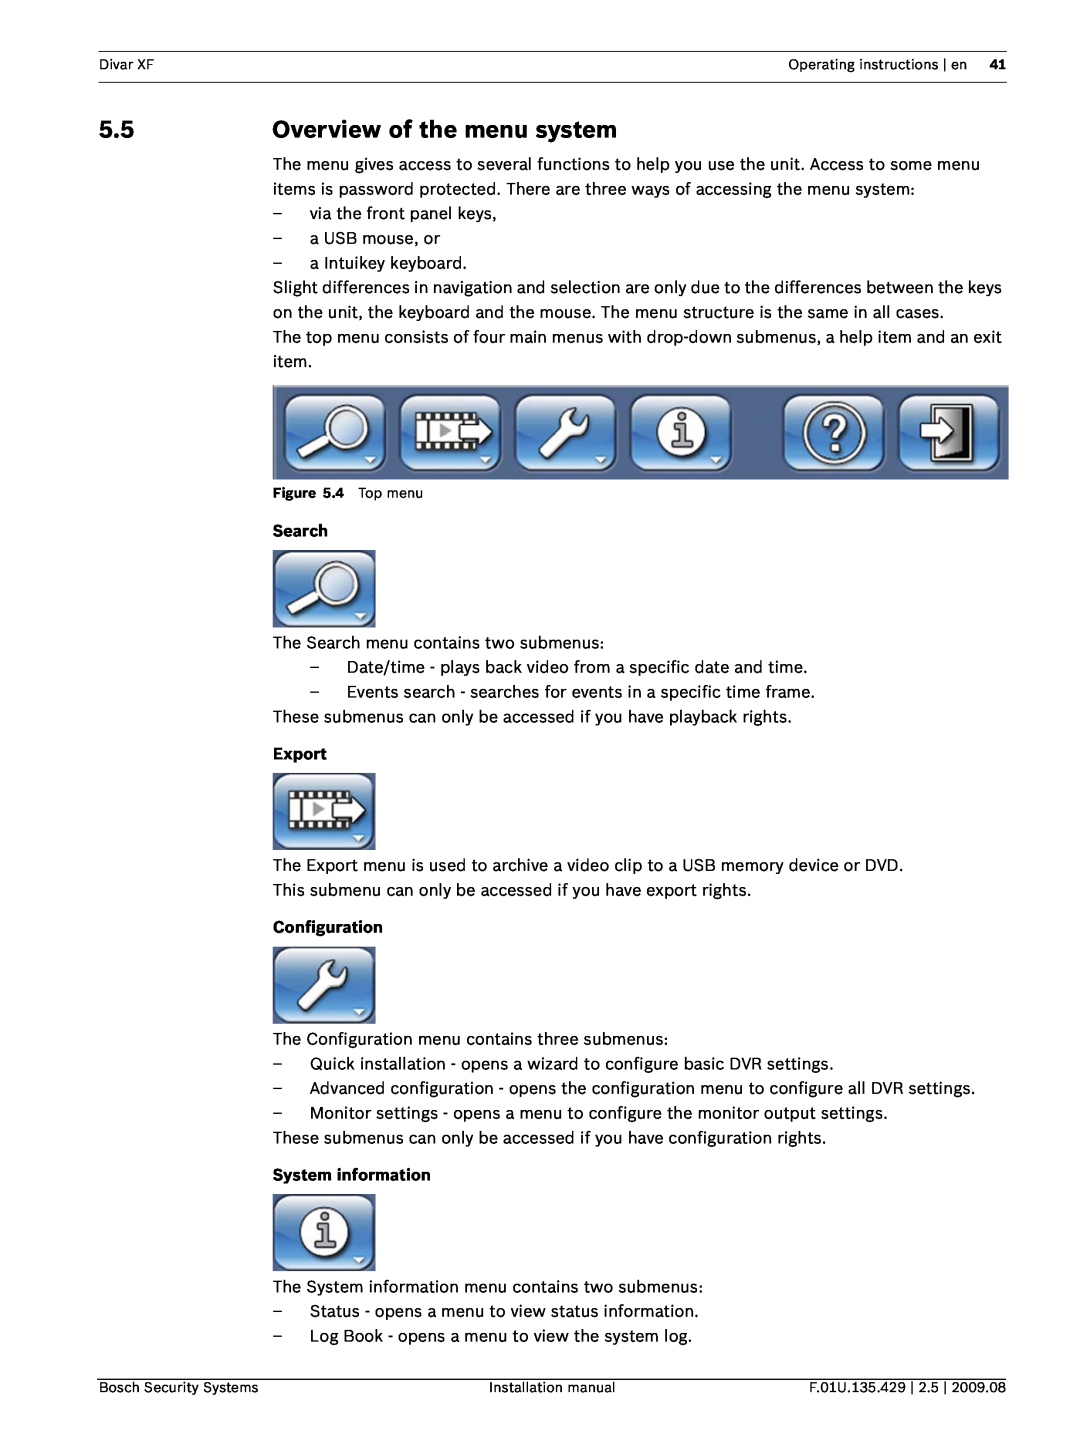 Bosch Appliances XF installation manual Overview of the menu system, Search, Export, Configuration, System information 